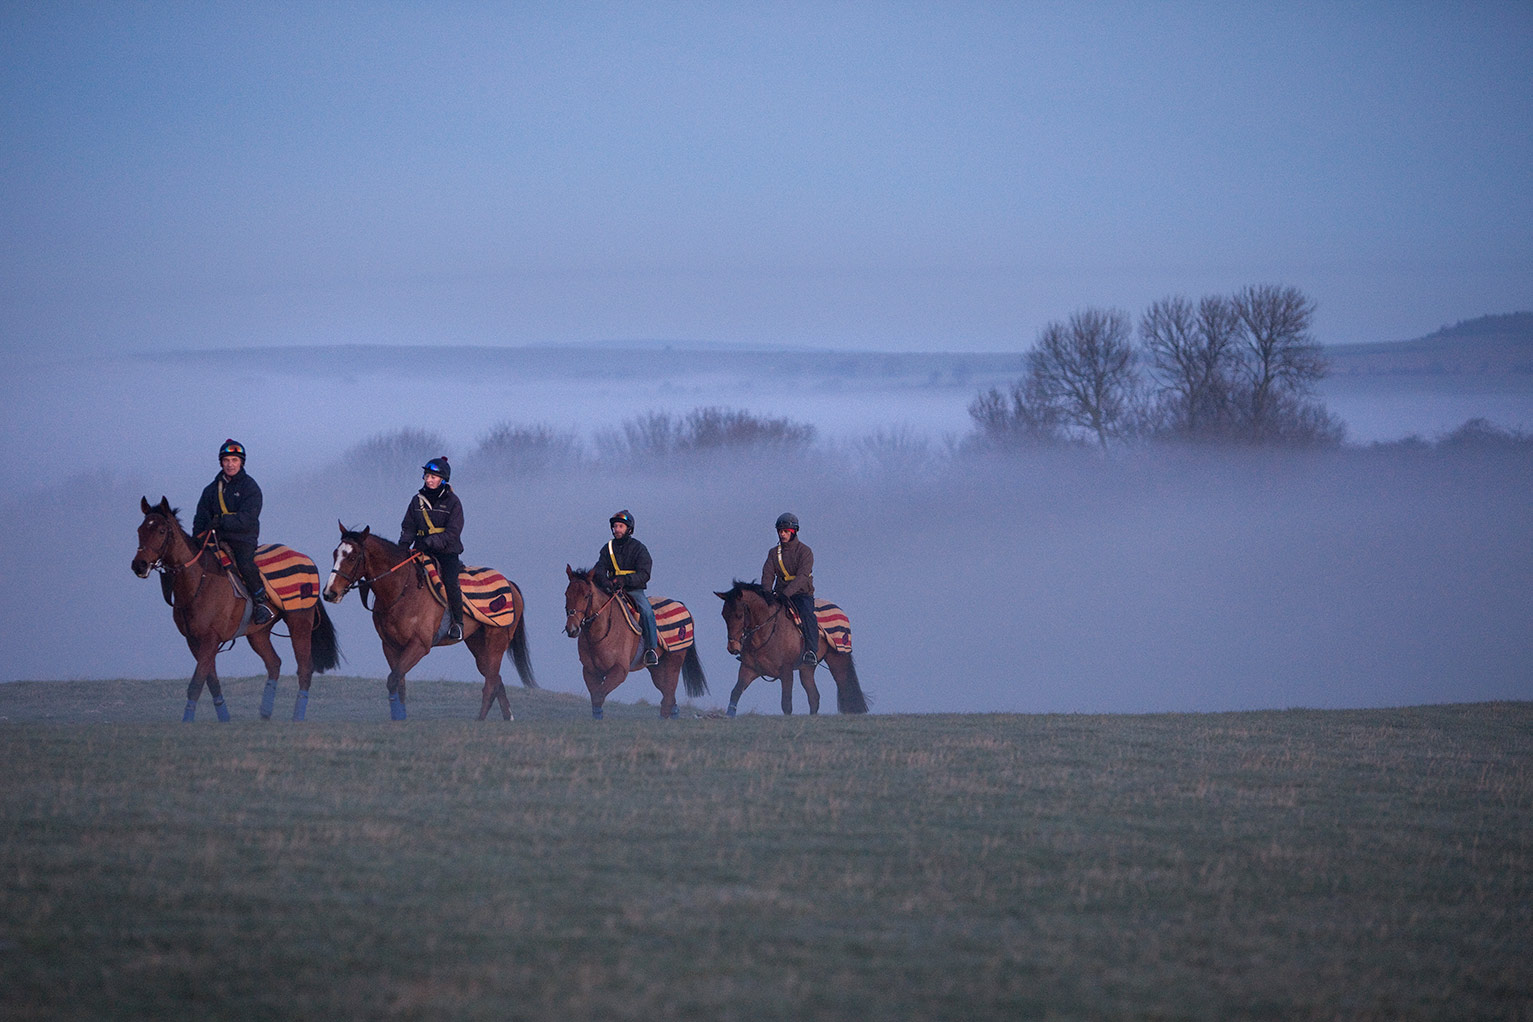 Misty-ride-back-from-the-gallops